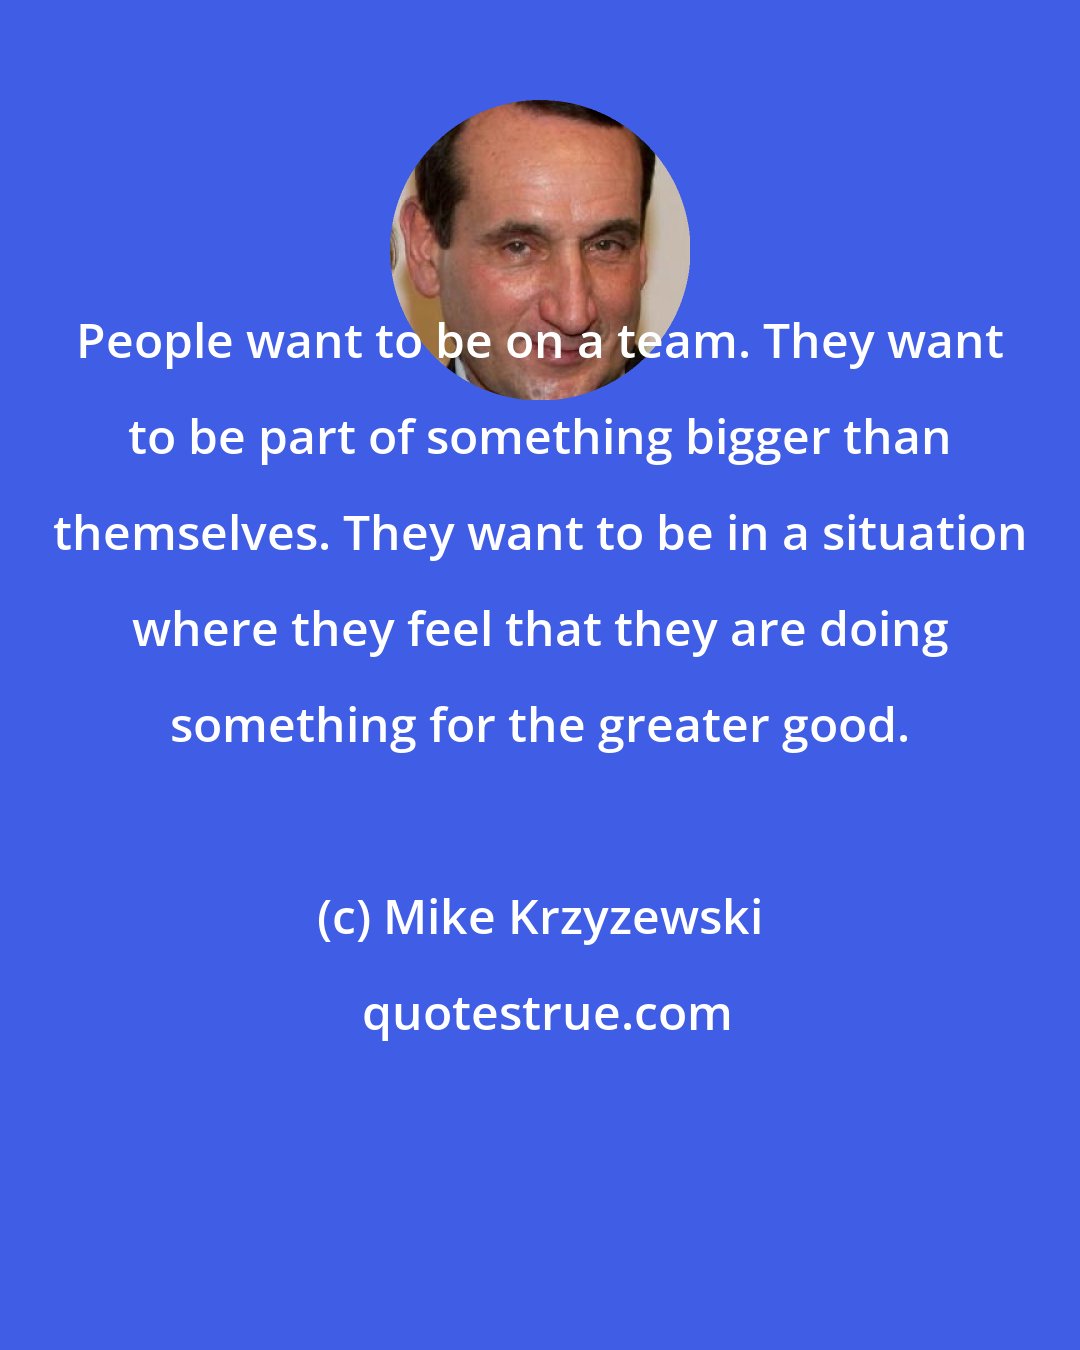 Mike Krzyzewski: People want to be on a team. They want to be part of something bigger than themselves. They want to be in a situation where they feel that they are doing something for the greater good.